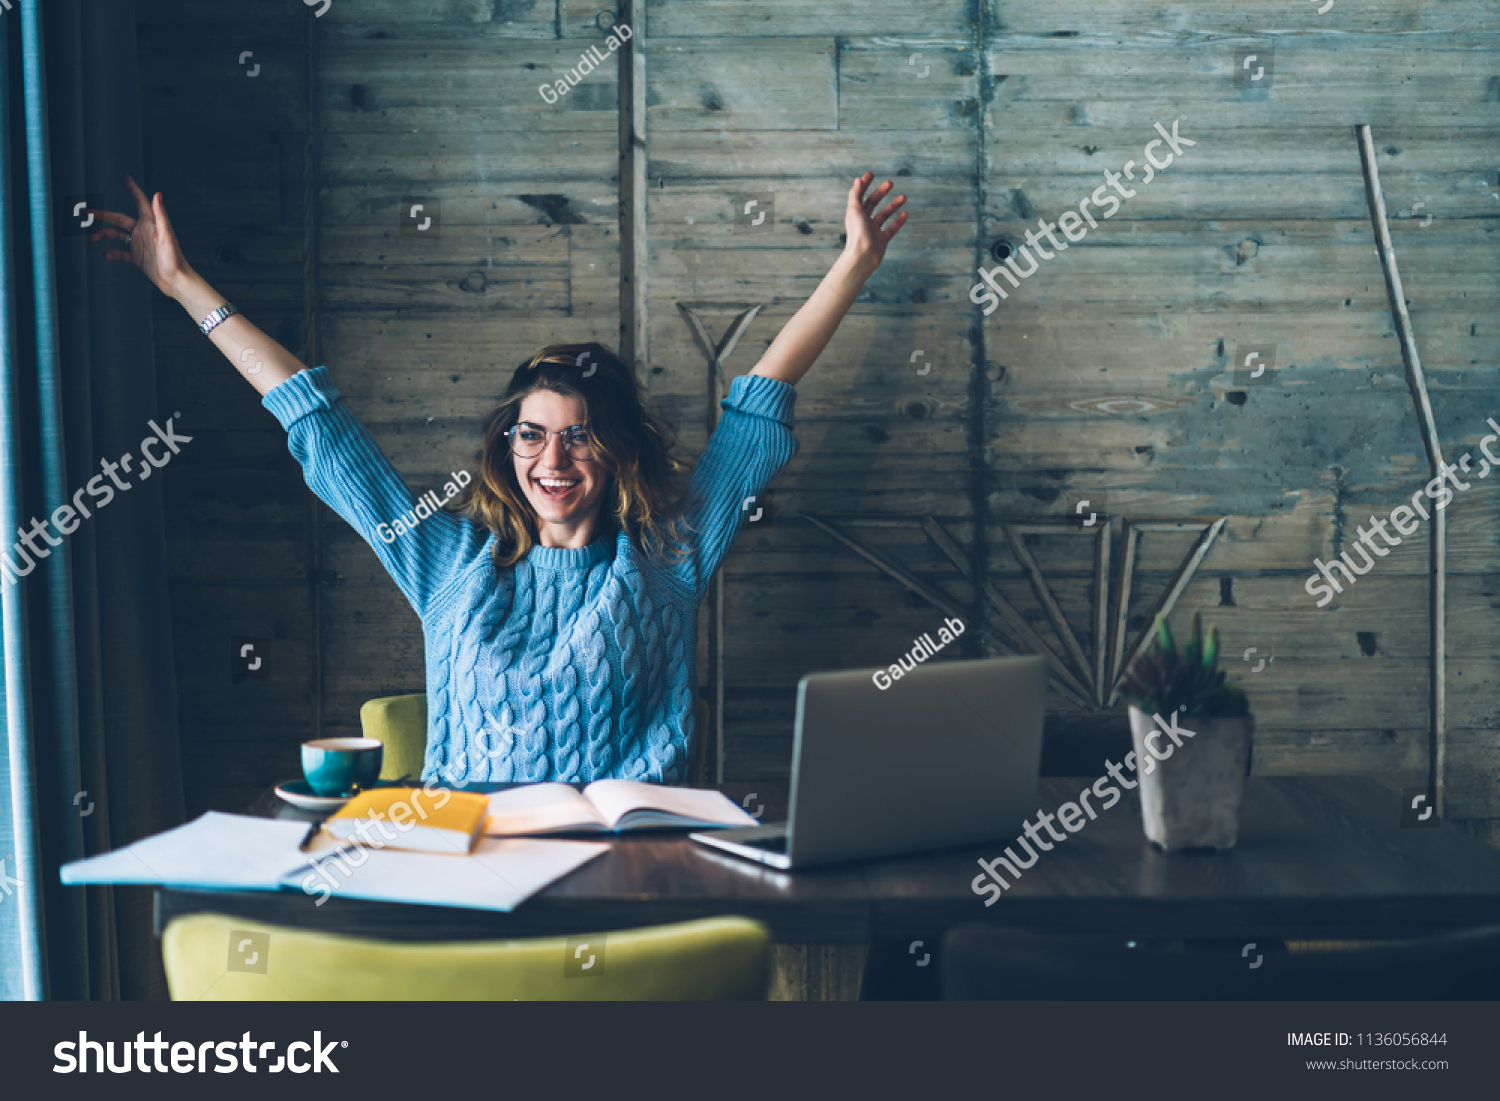 Student girl sitting at table with open notebook and raises hands up while smiling with sincere happiness. 
Woman overjoyed about successfully completed project on computer. Concept of achievement #1136056844